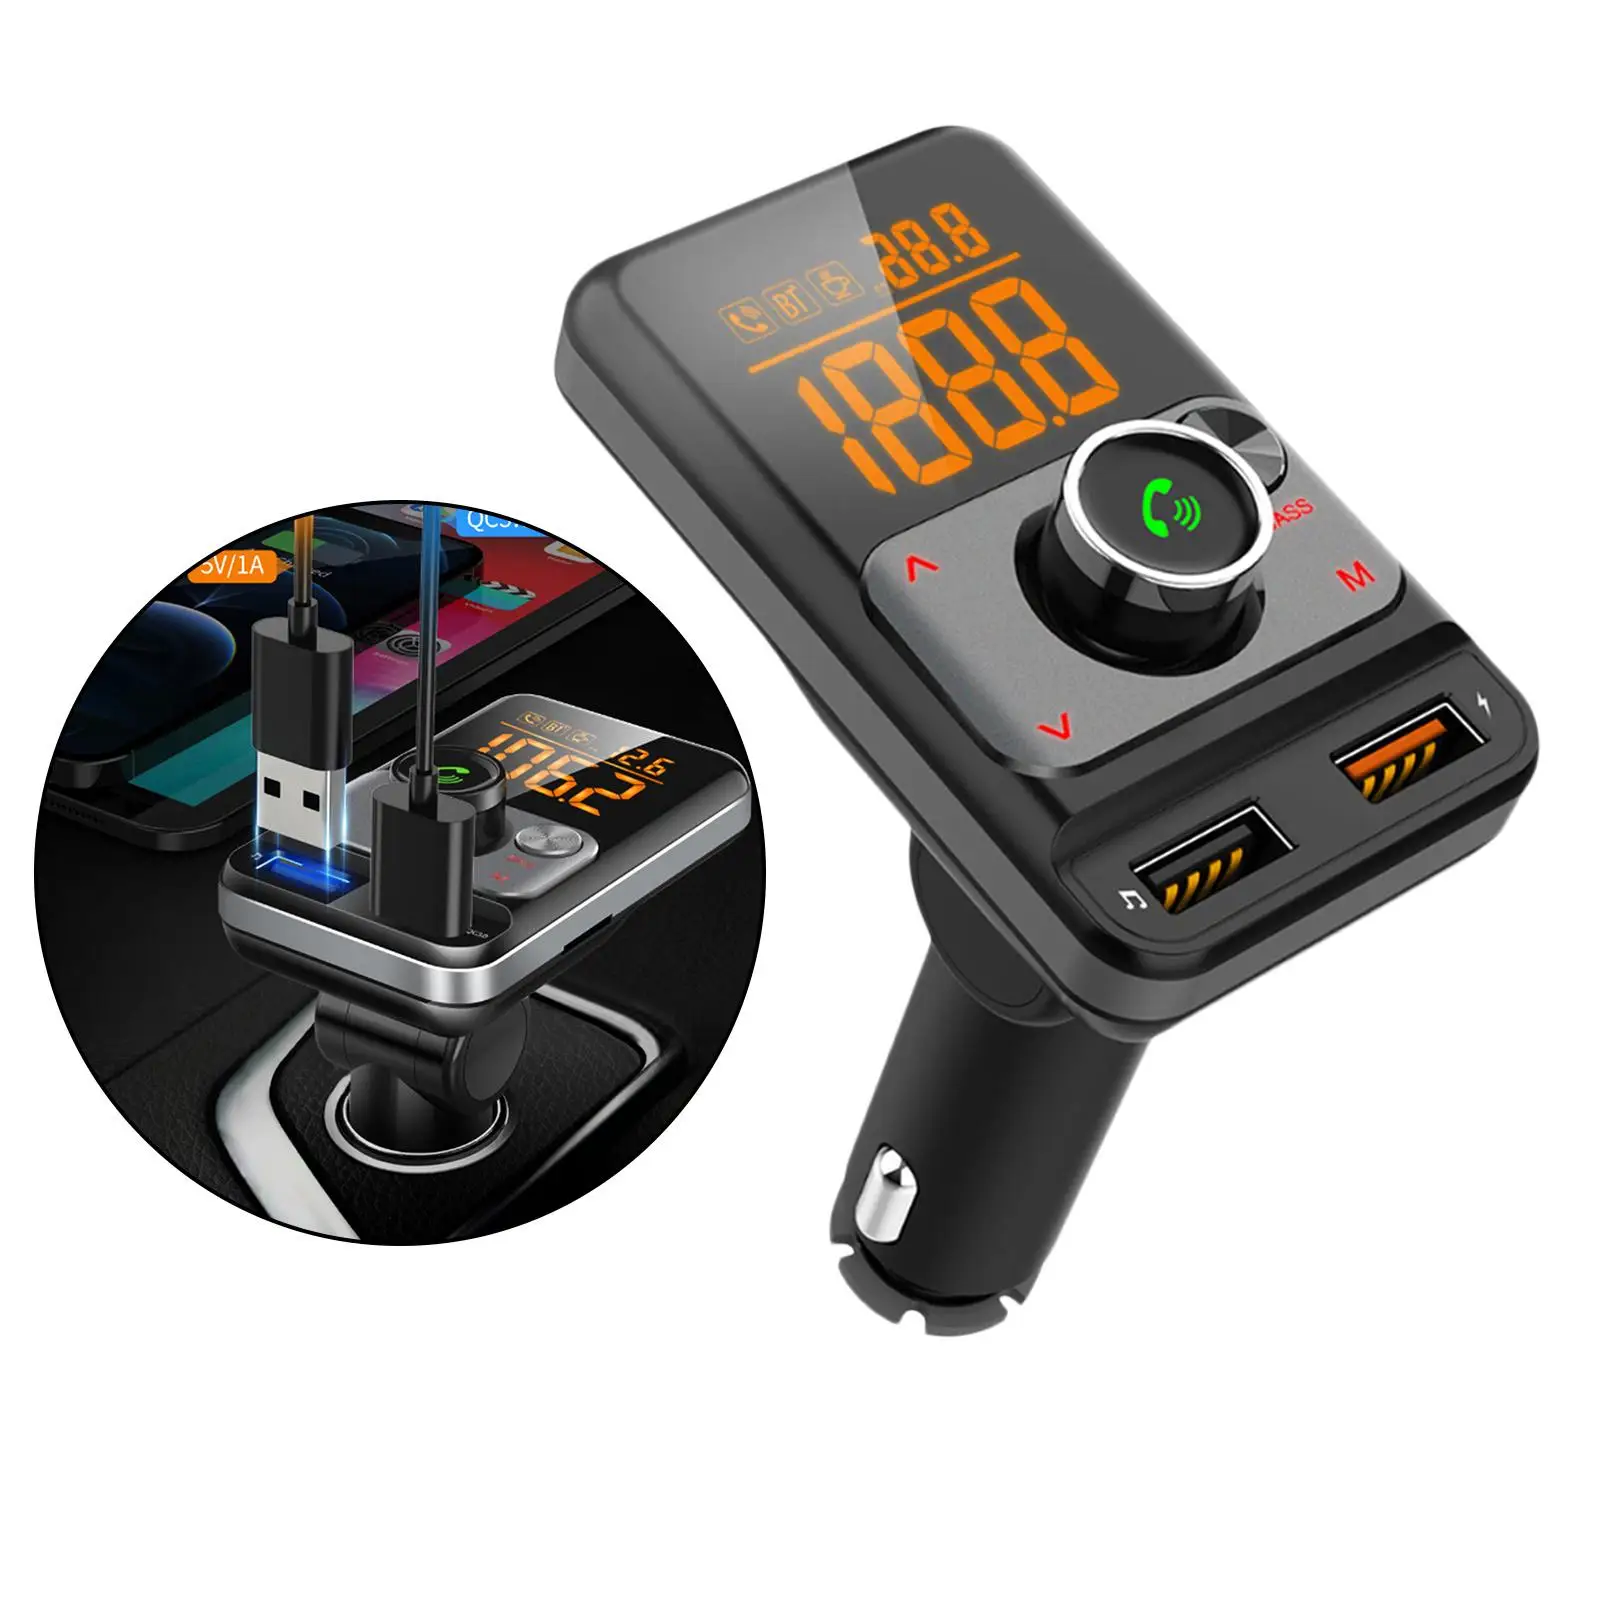 Bluetooth FM Transmitter LED Display Hands-Free Music Player Adapter Speaker for Radio Streaming Car Stereo Phone Headphones